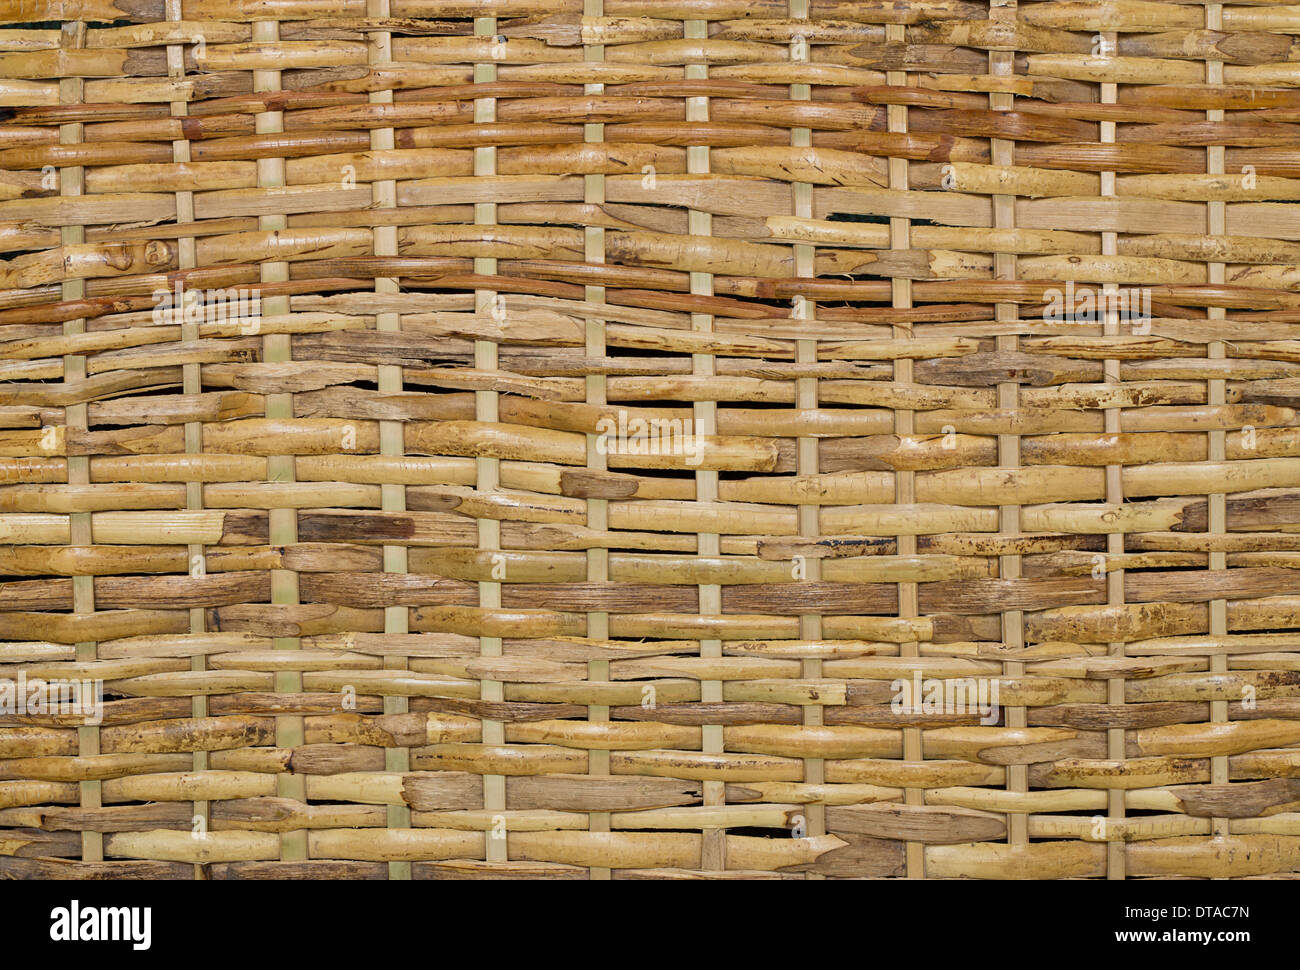 Woven wood wicker fence panel suitable for crafts, picnic or gardening background or wallpaper Stock Photo